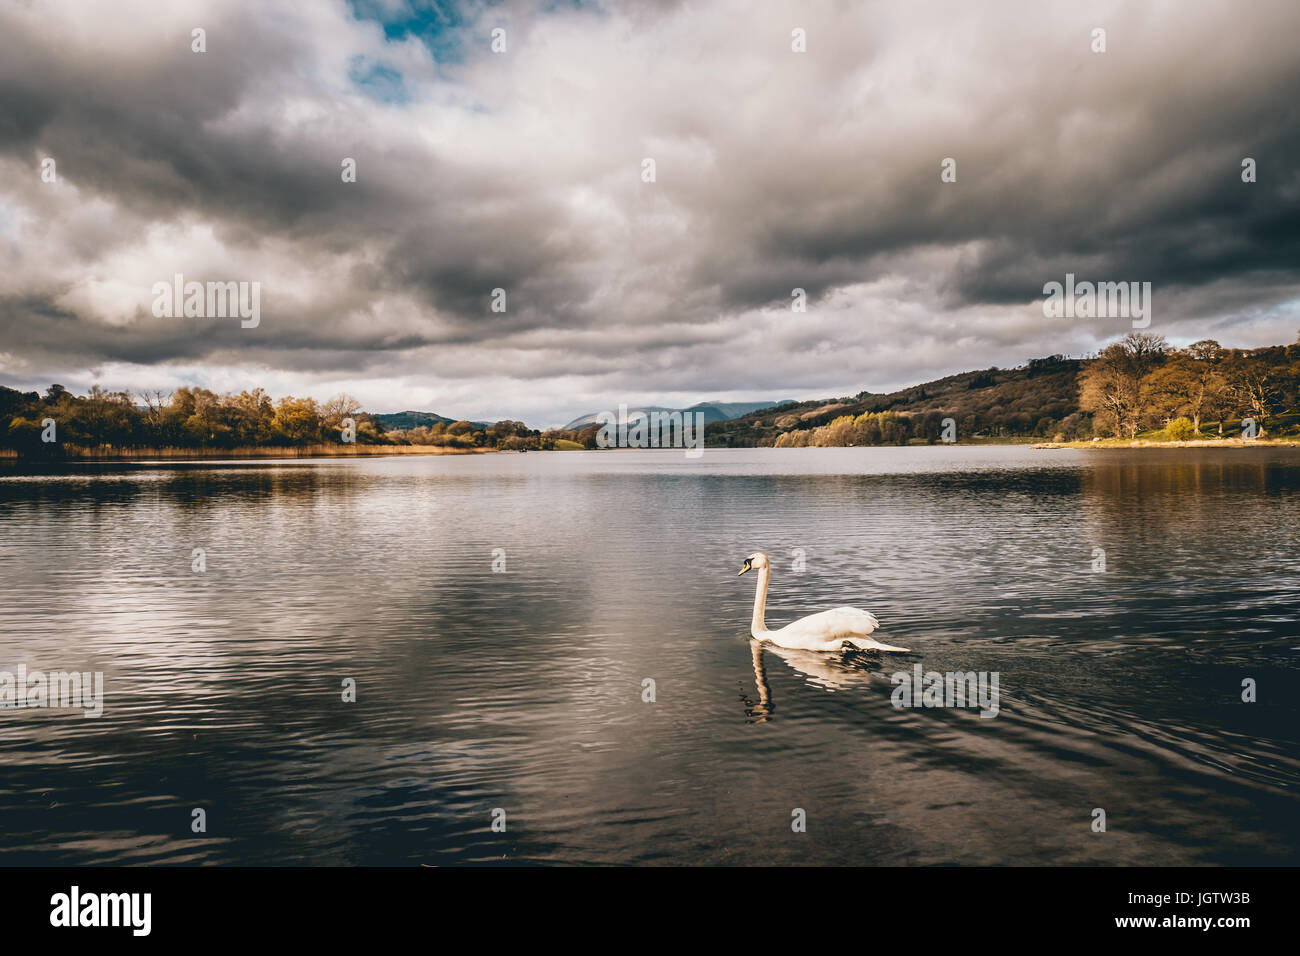 Swan Swimming In Lake Against Cloudy Sky Stock Photo